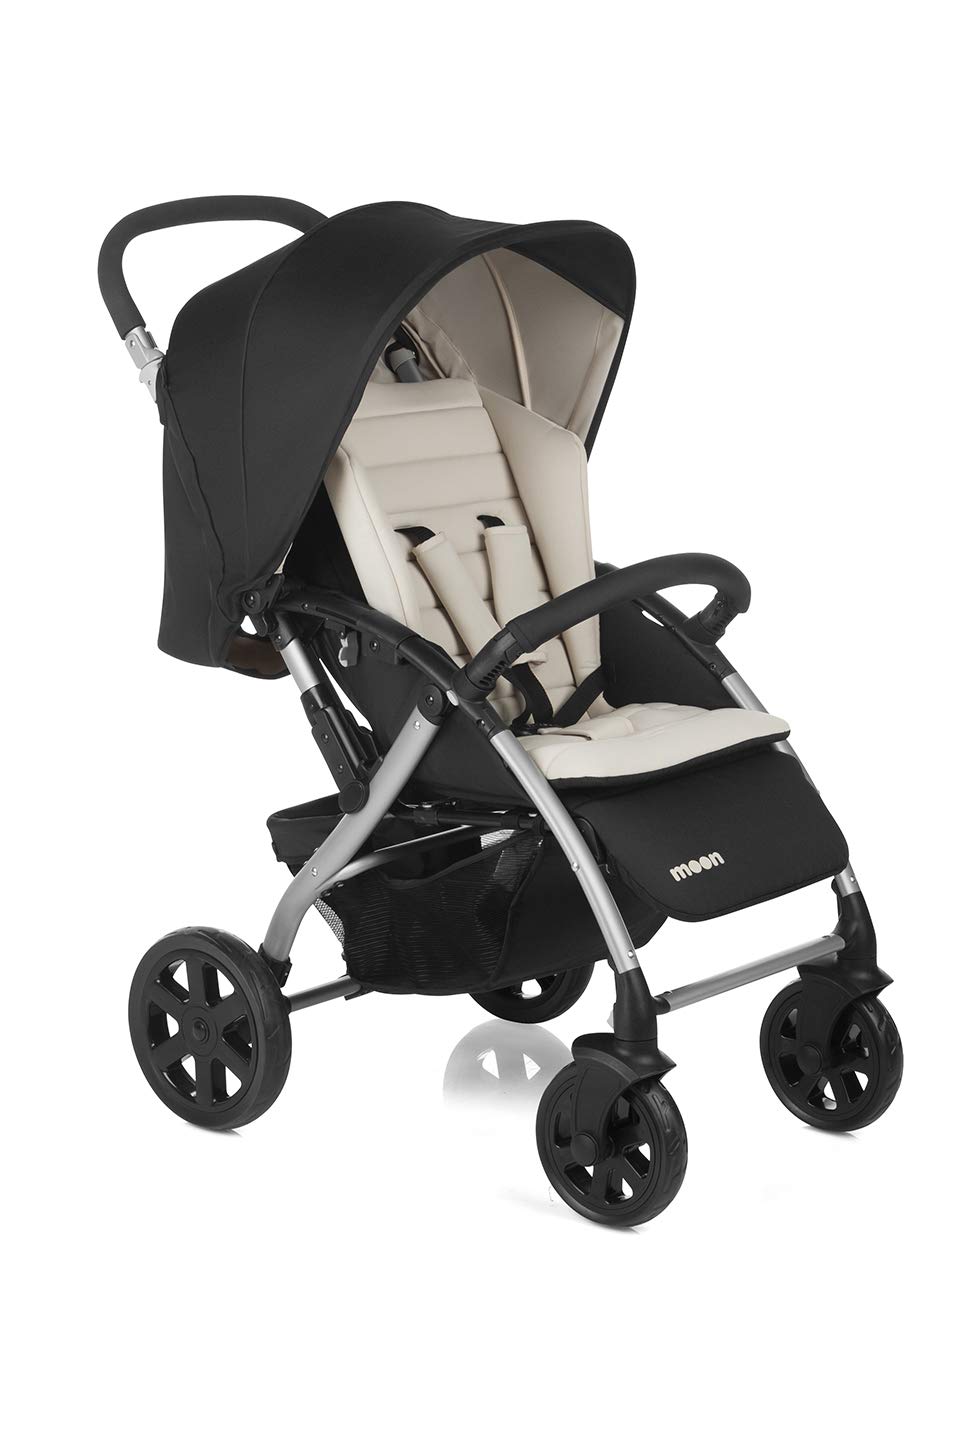 Nurse by Jané 8027 613 Moon Pro Pushchair from 6 Months to 15 kg Compact Folding with Large Shopping Basket and Rain Cover Beige 9.2 kg